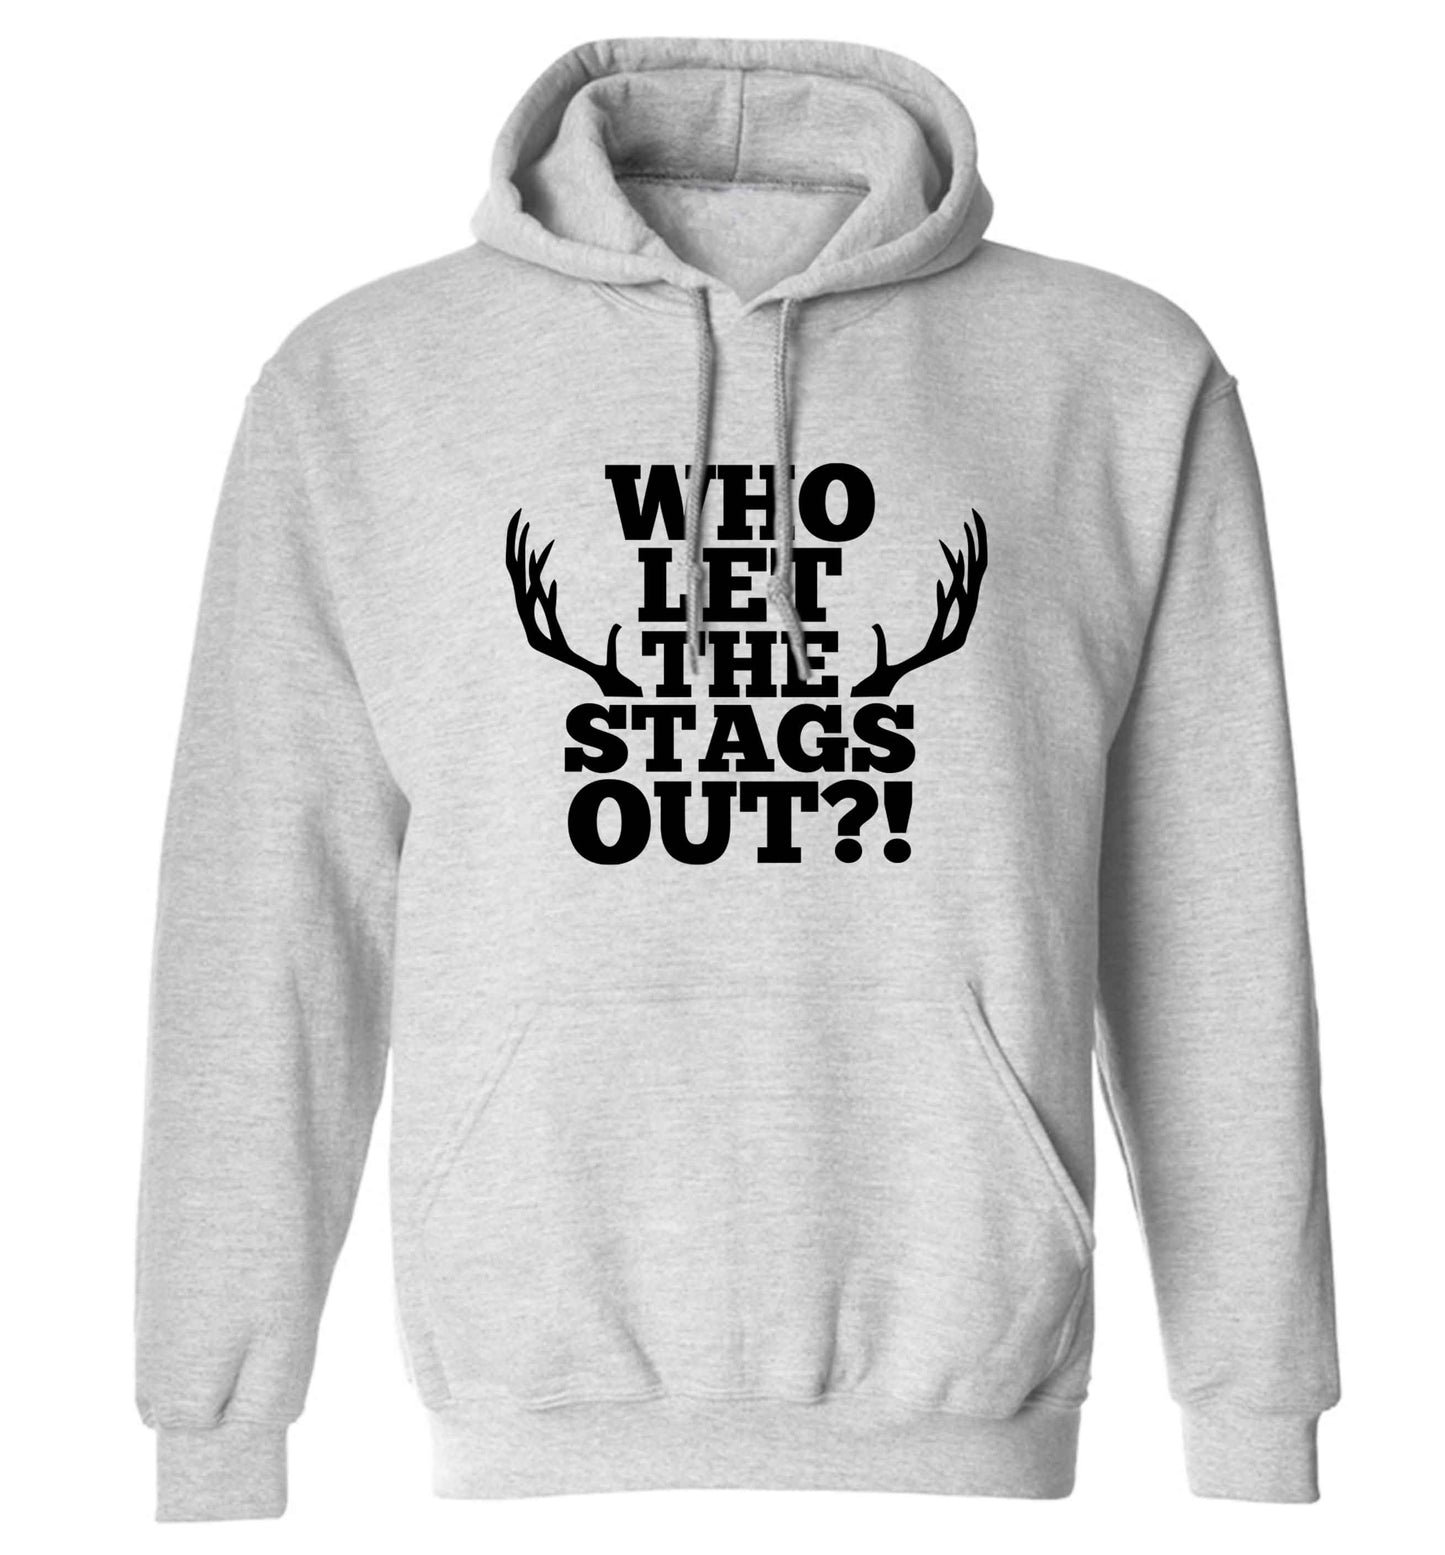 Who let the stags out adults unisex grey hoodie 2XL